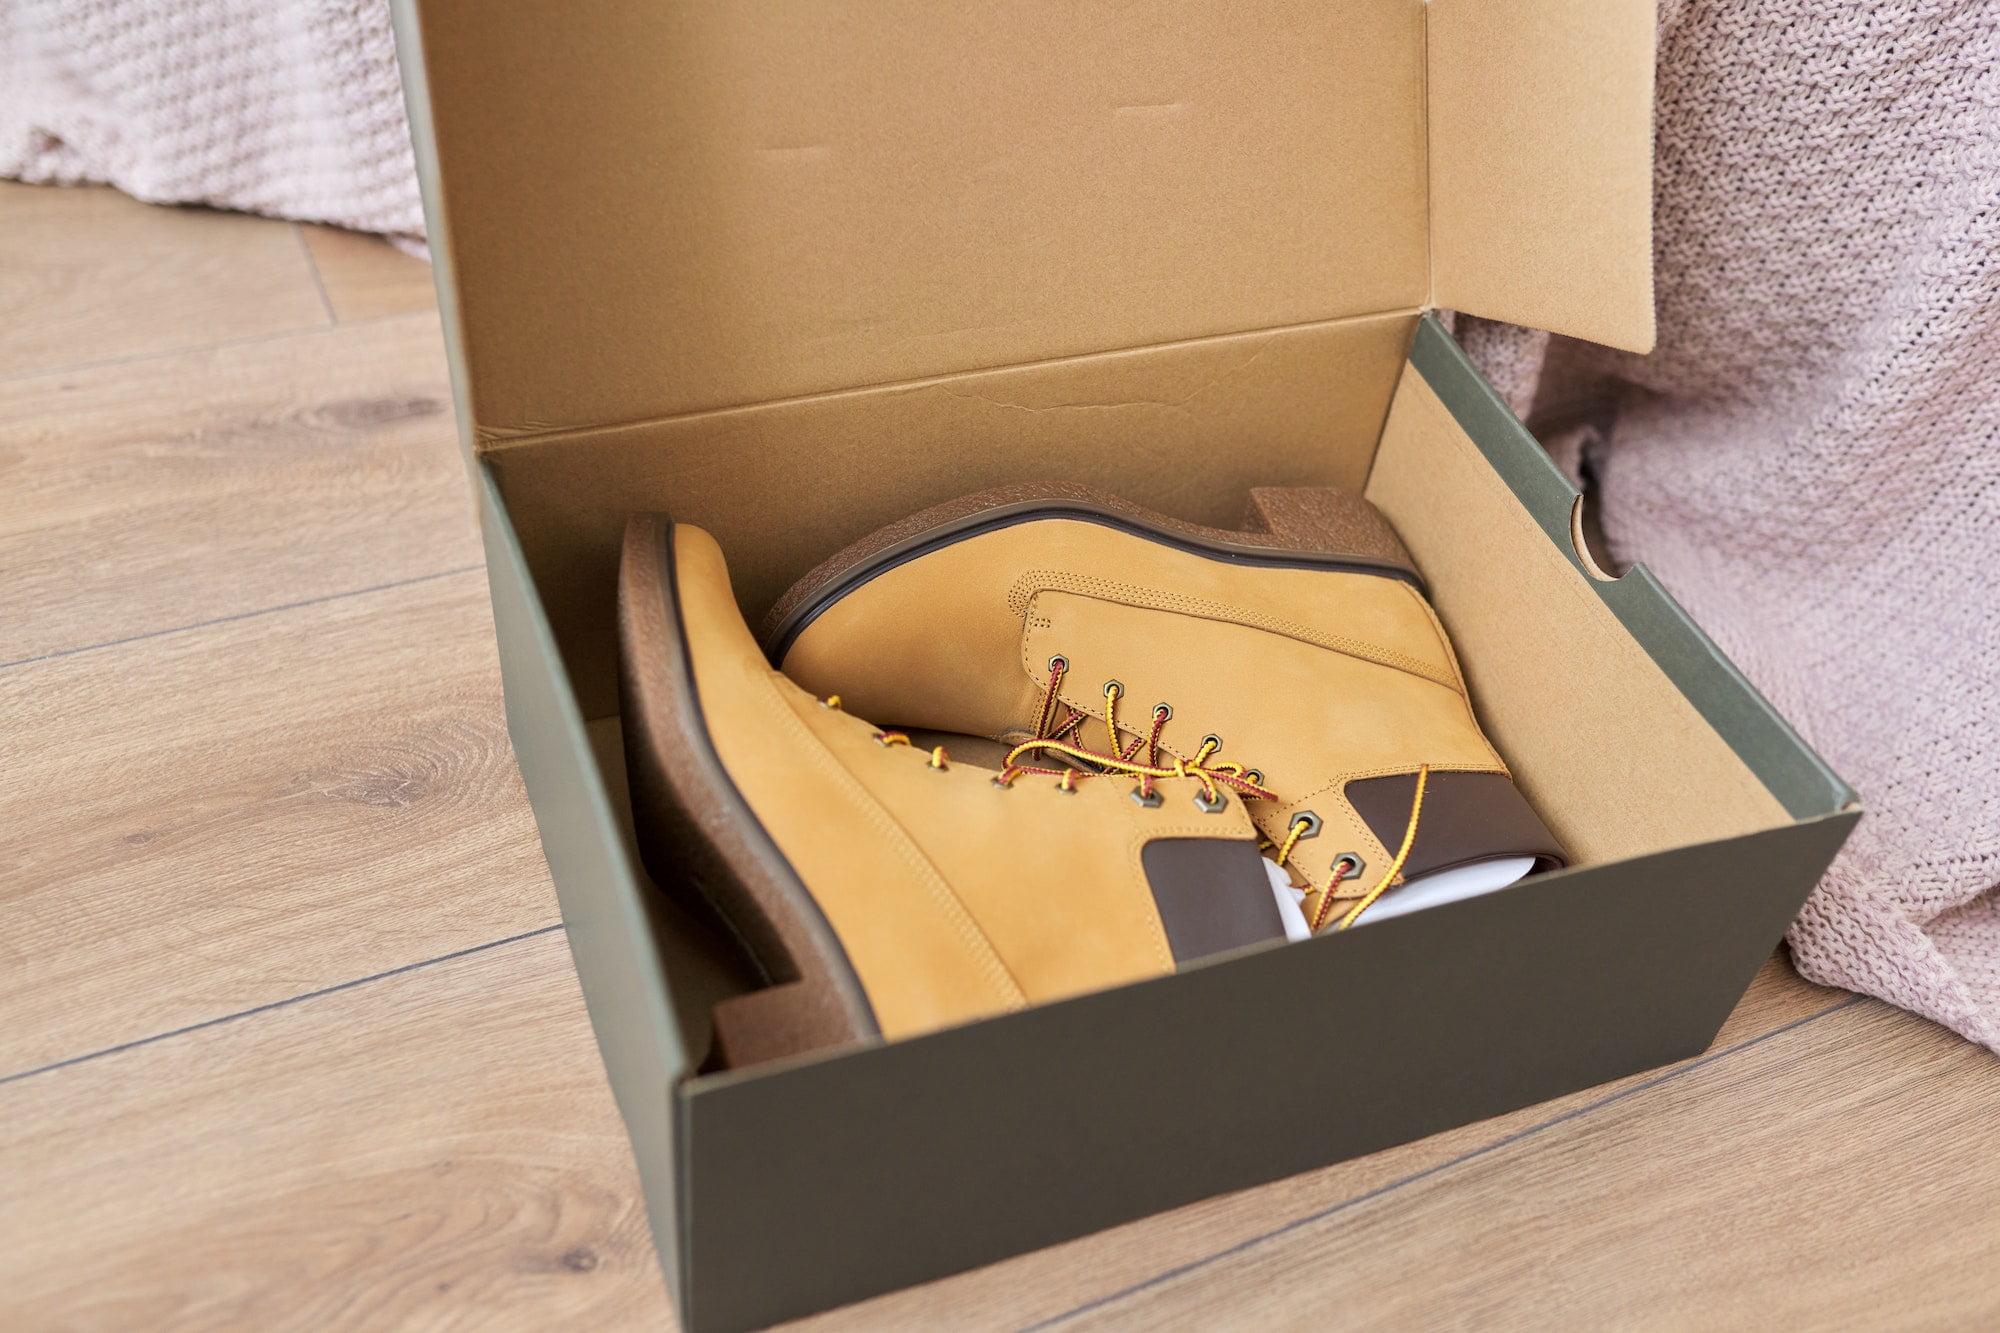 A pair of boots in a box on a wooden floor.